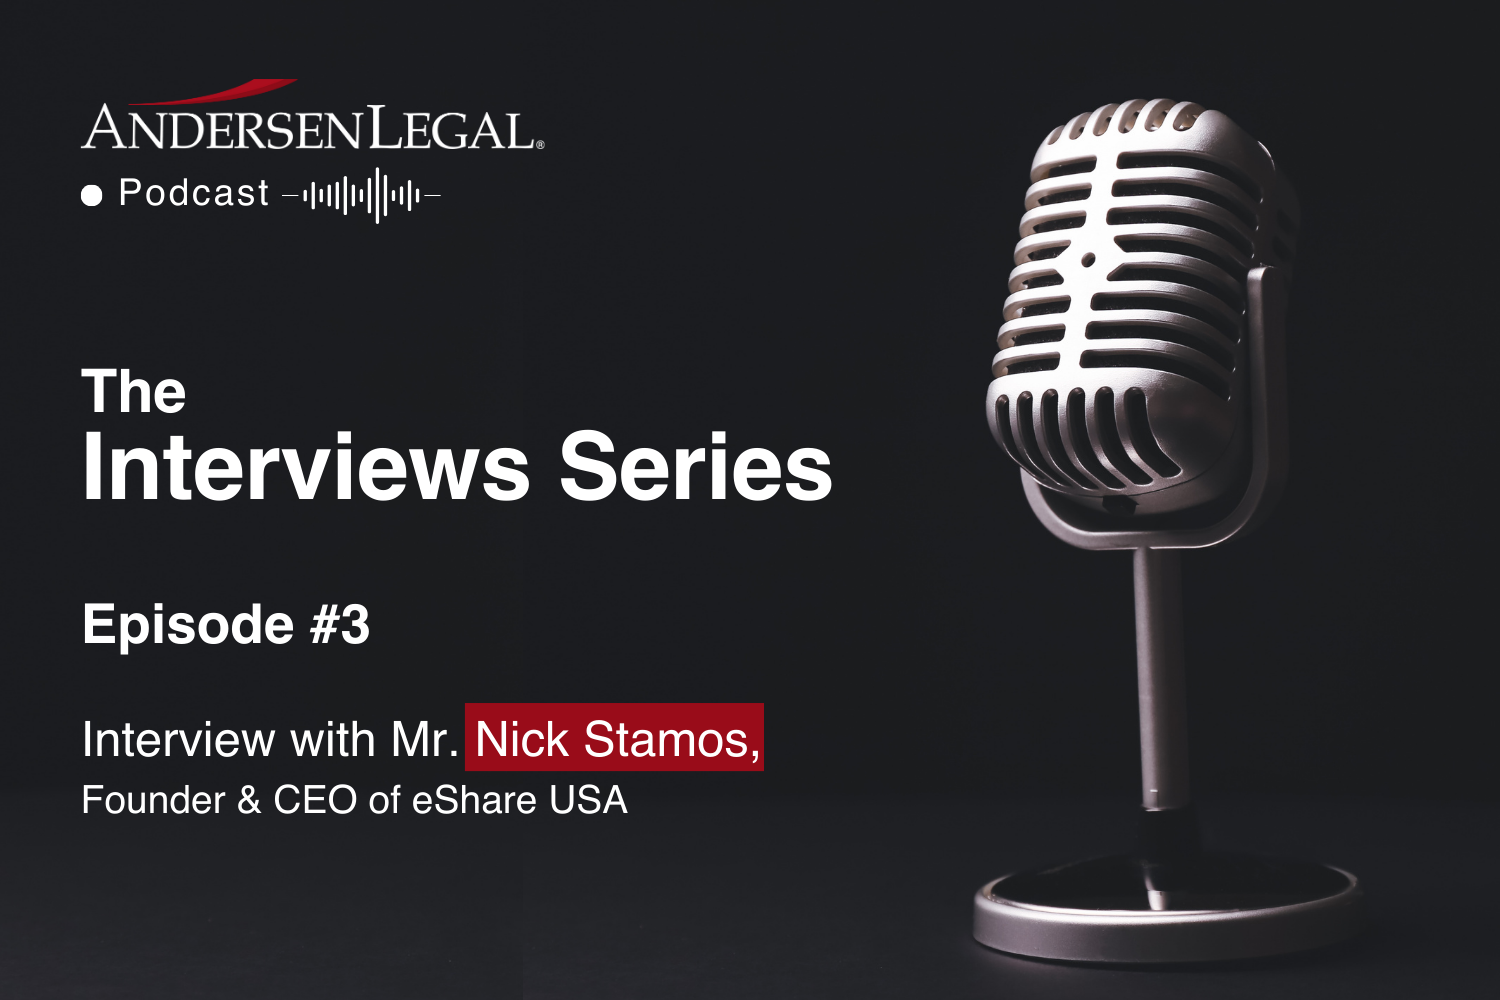 The Interviews Series: Mr. Nick Stamos, Founder & CEO of eShare